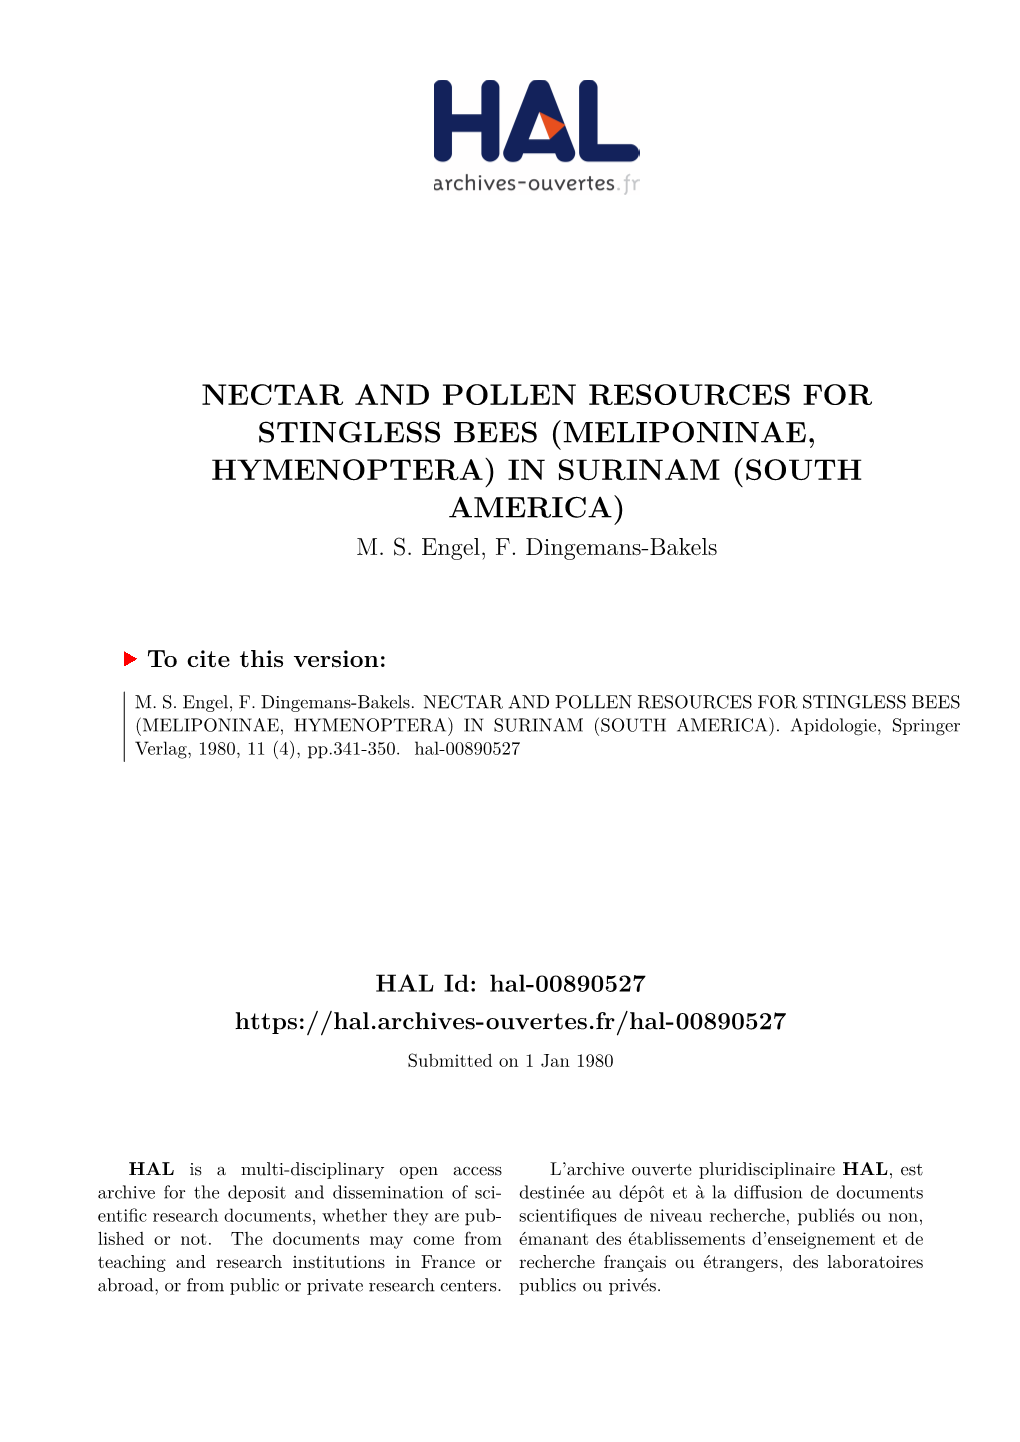 Nectar and Pollen Resources for Stingless Bees (Meliponinae, Hymenoptera) in Surinam (South America) M